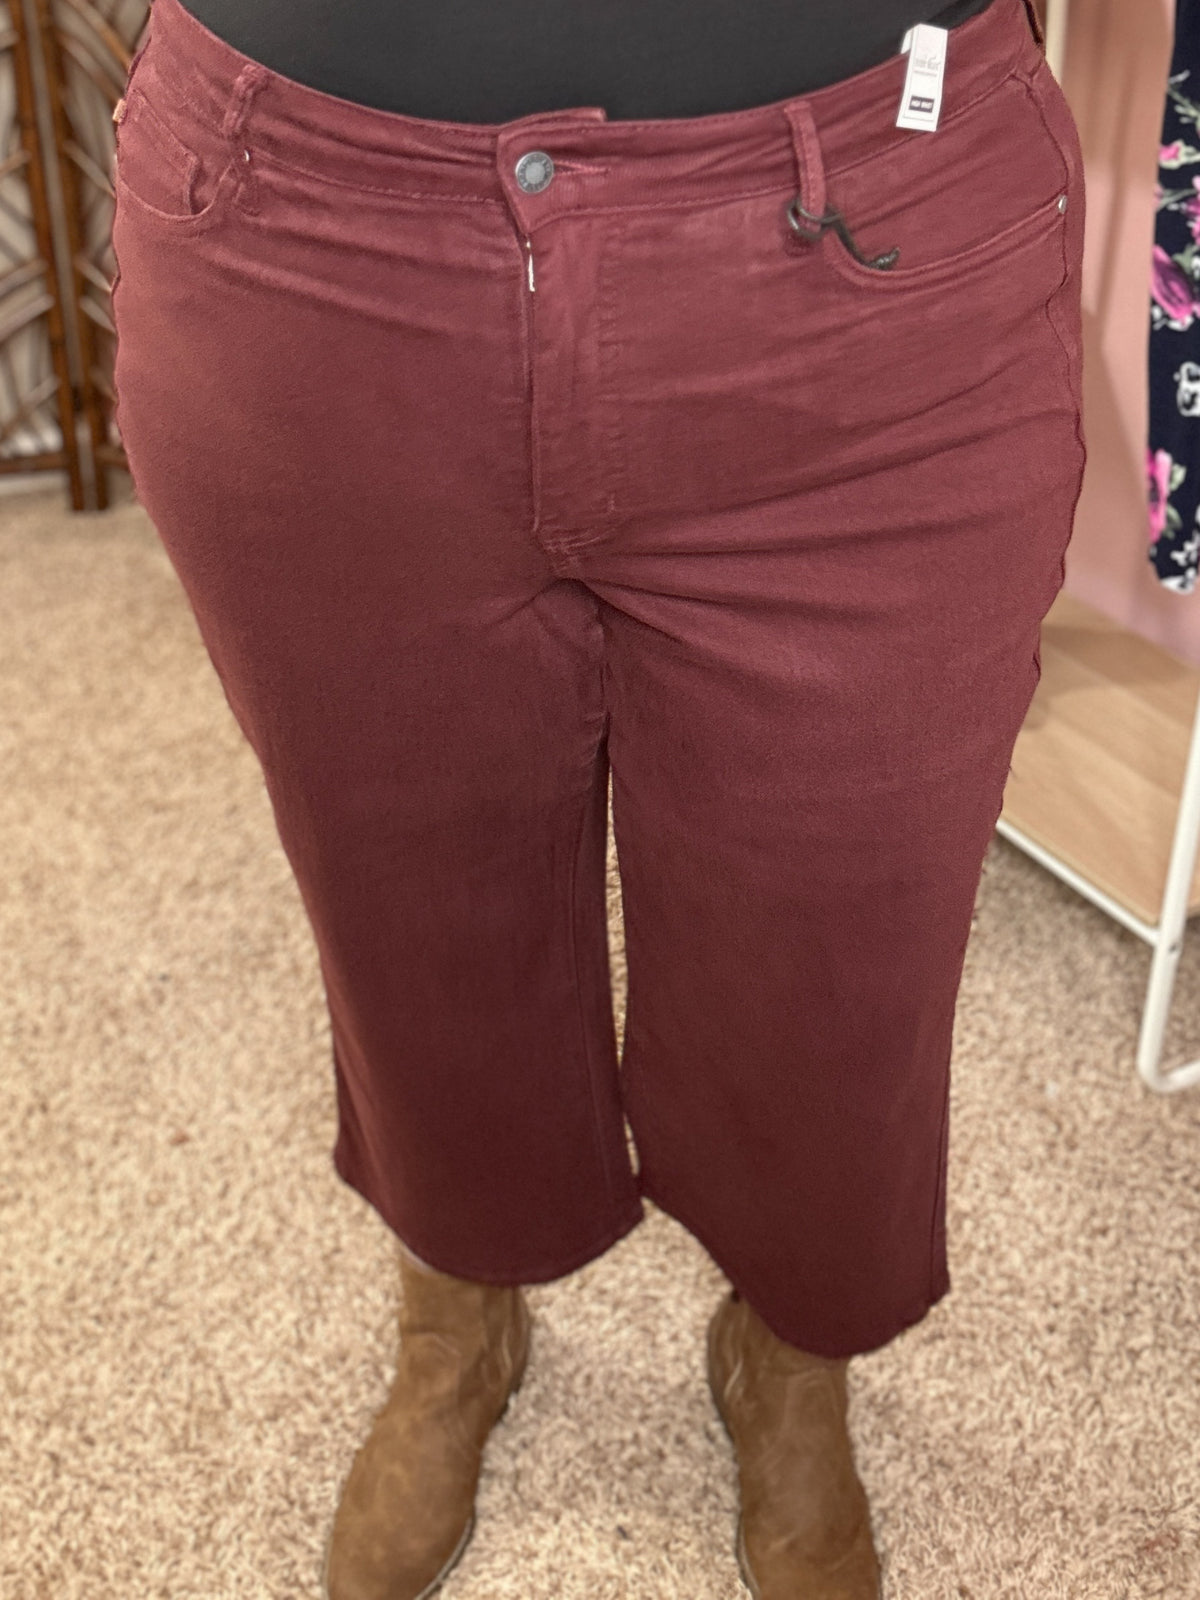 Just This Once Tummy Control Cropped Judy Blue Jeans - Oxblood